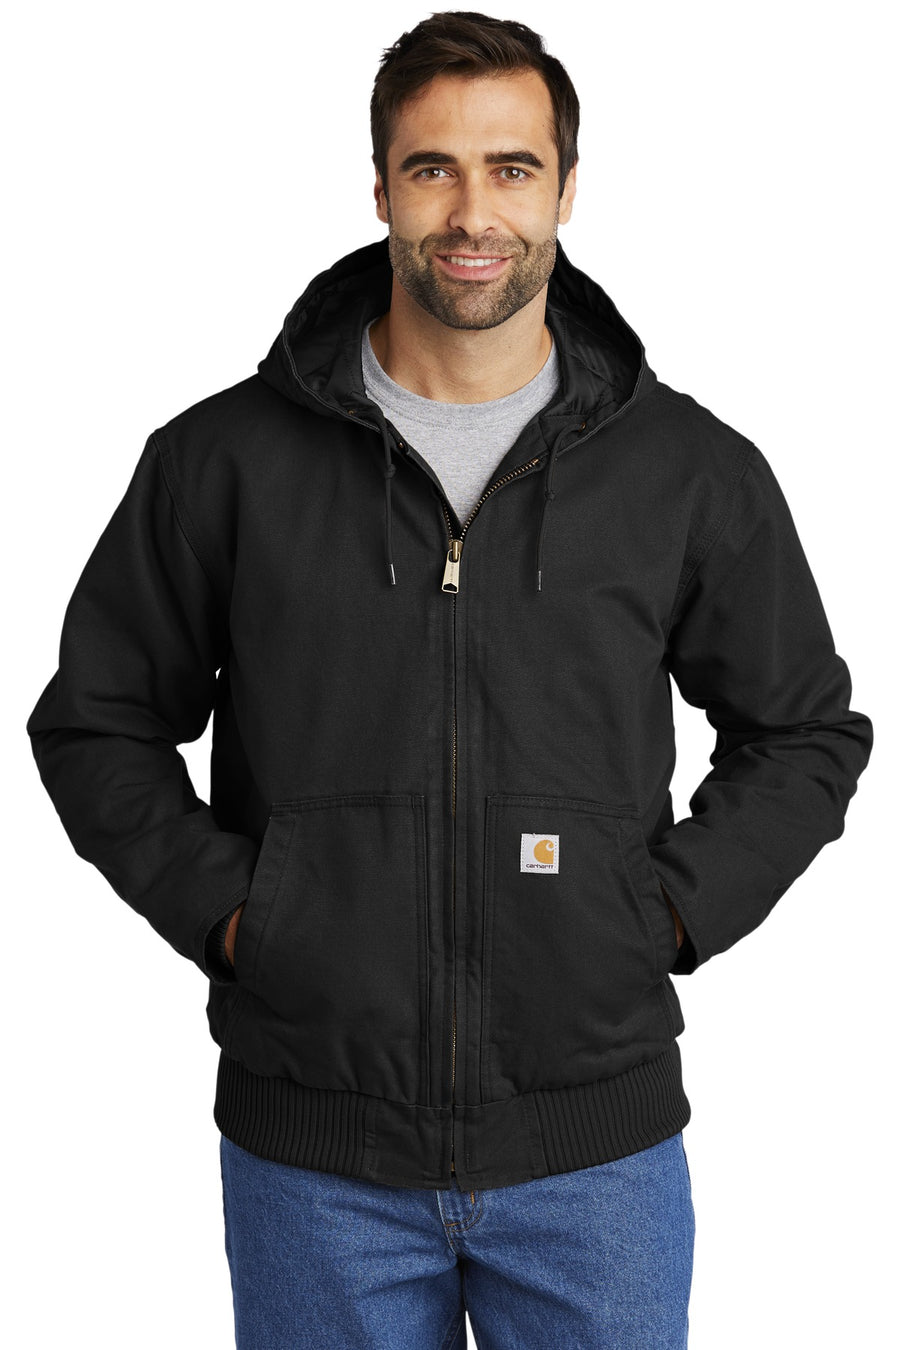 Carhartt Washed Duck Active Jac.